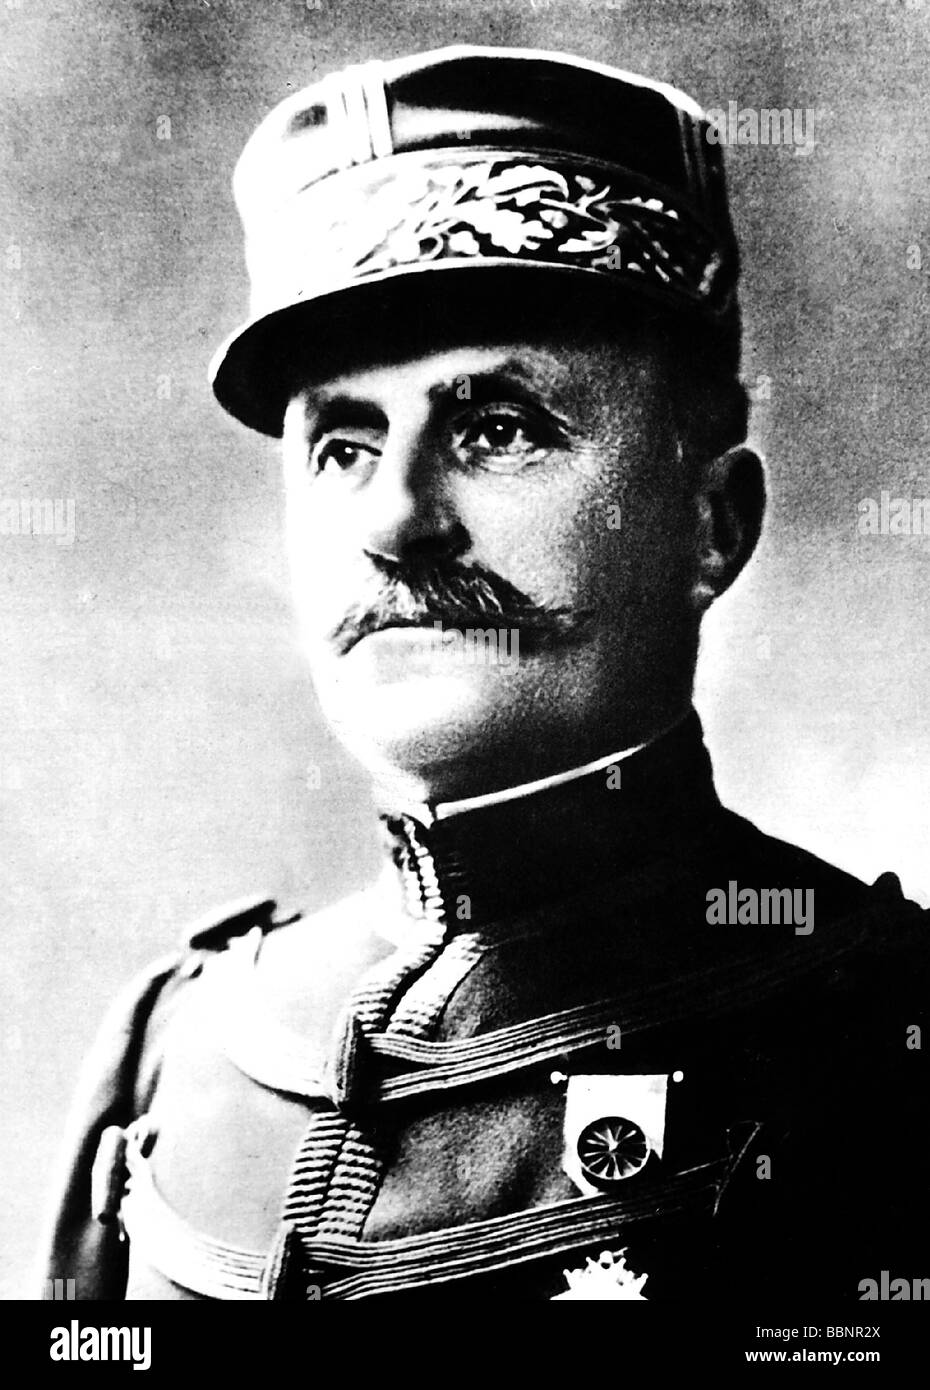 Foch, Ferdinand, 2.10.1851 - 20.3.1929, French general, commander in chief of the Entente forces 1918/1919, portrait, photo, circa 1915, Stock Photo